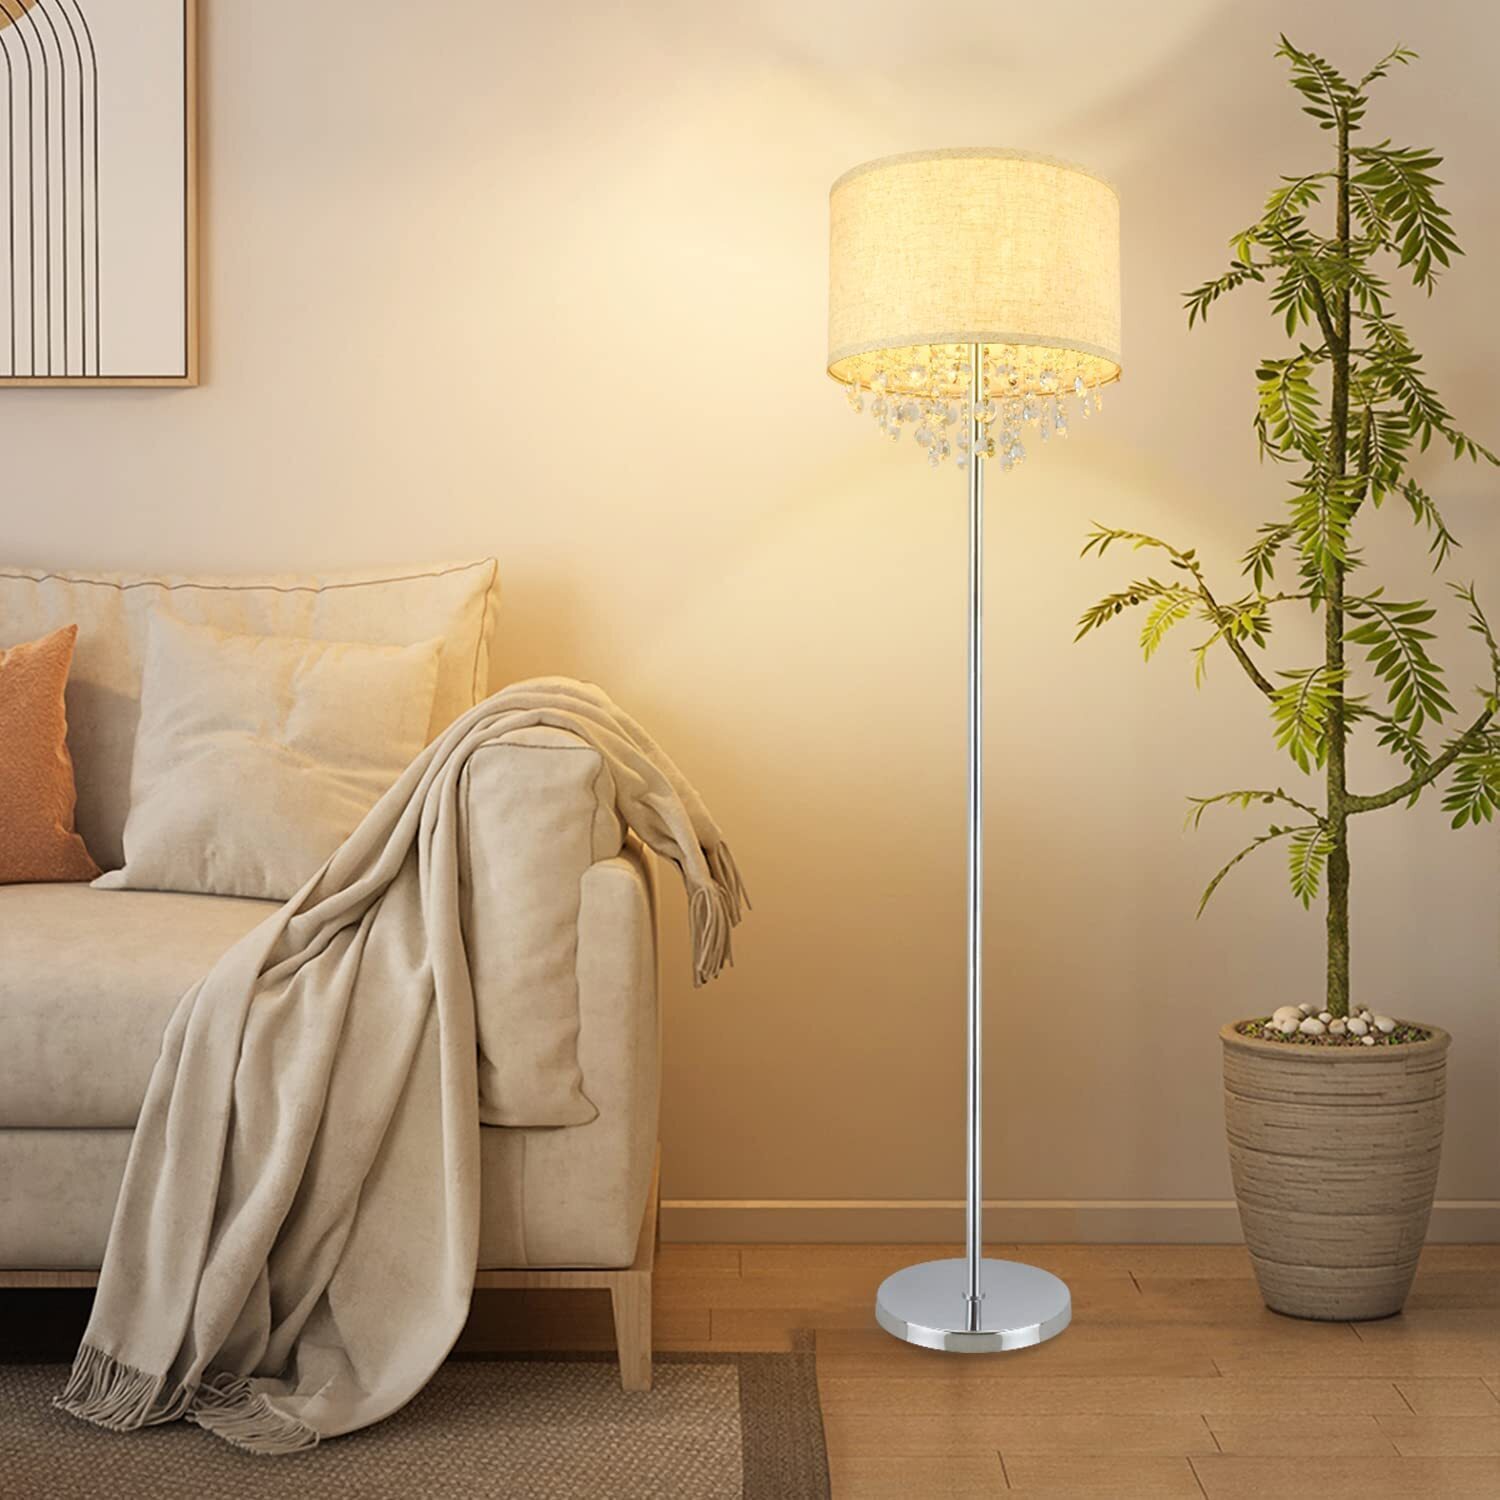 Crystal Floor Lamp With Fabric Lamp Shade